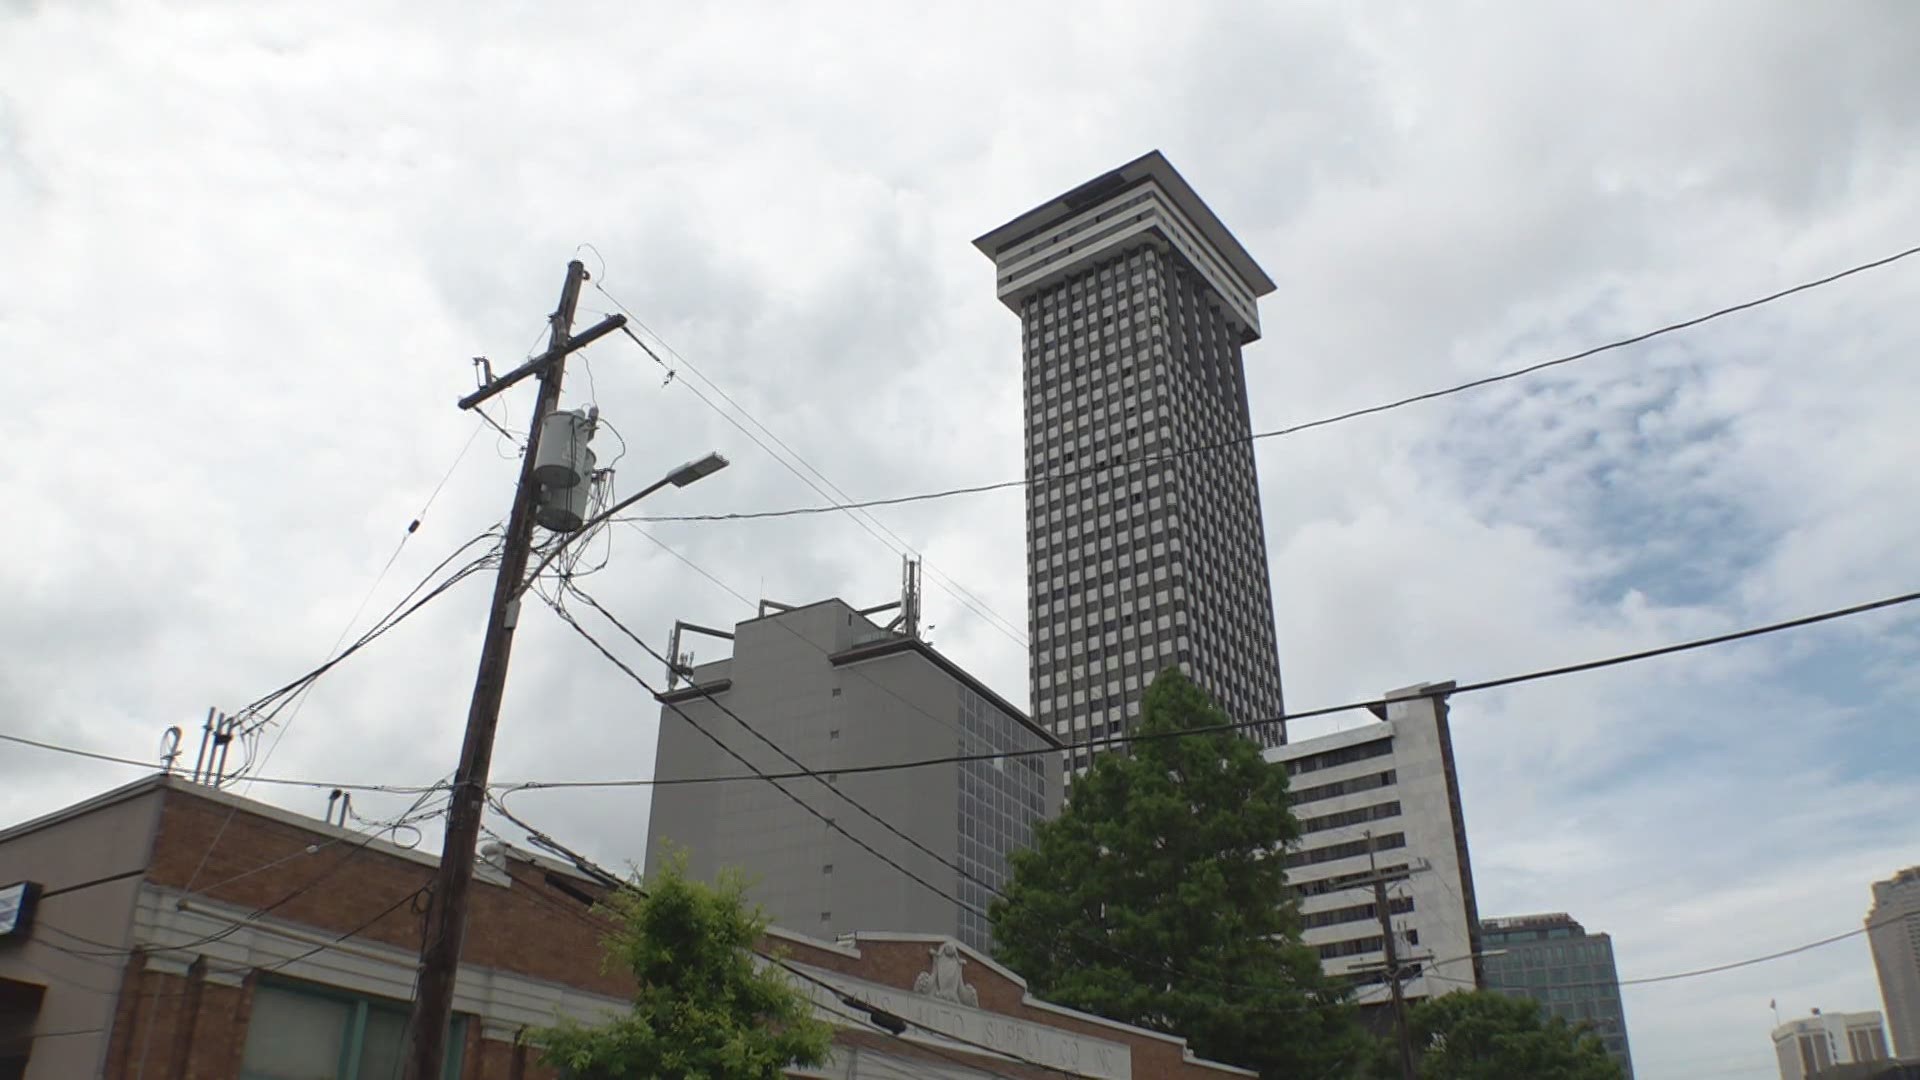 It's been nearly two weeks since pieces of the Plaza Tower fell, forcing the City to shut down the surrounding streets.